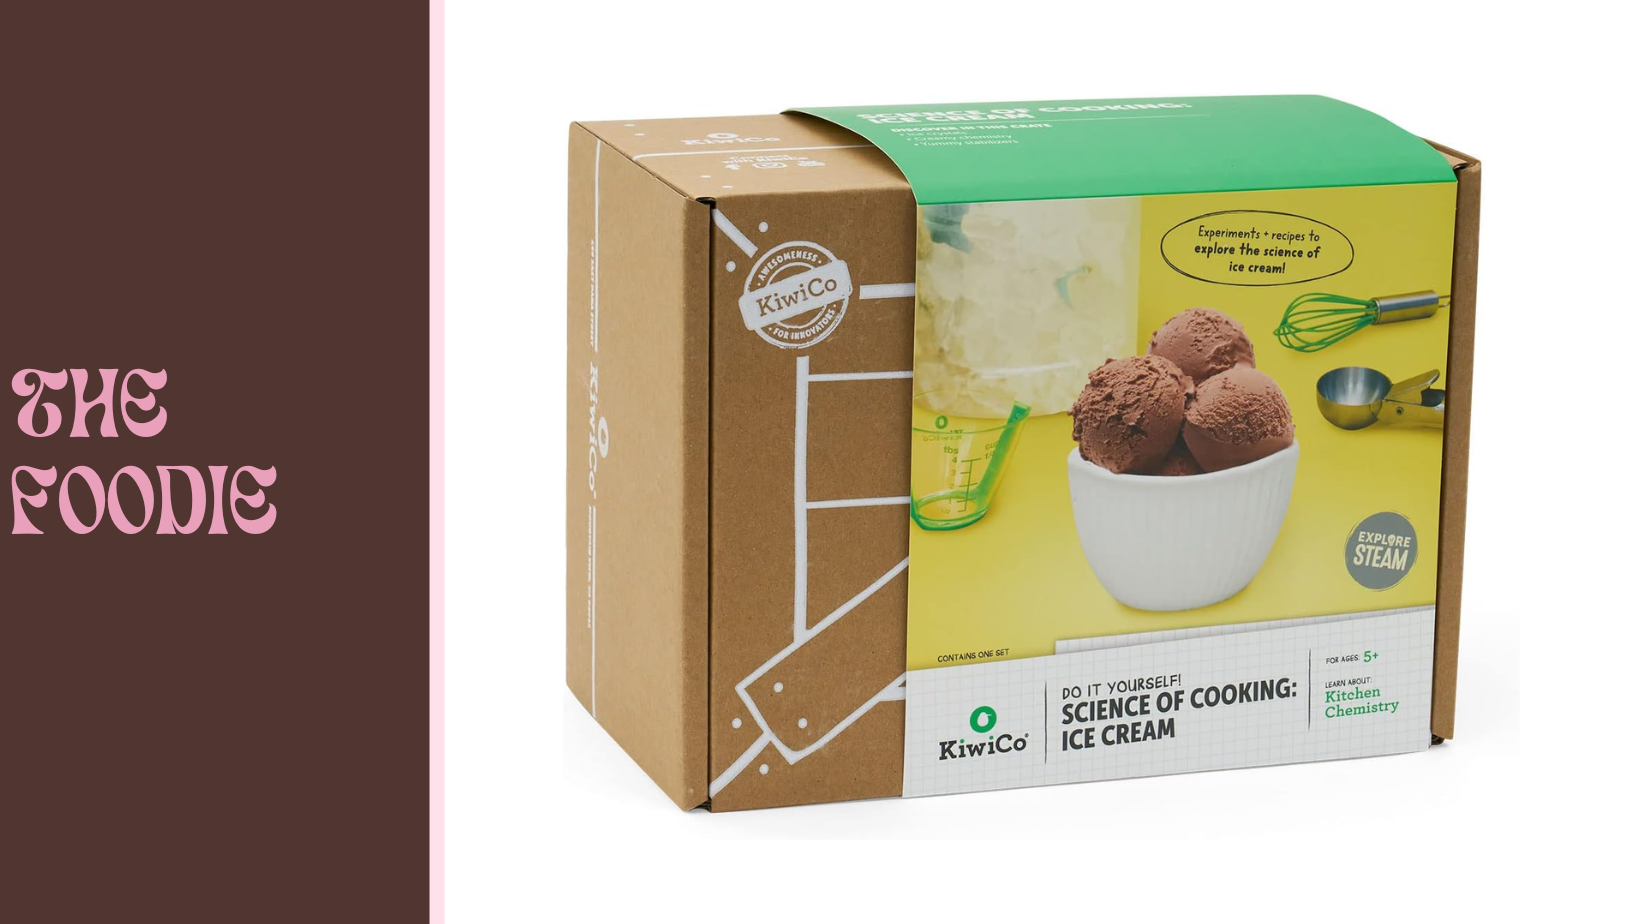 Science of Cooking: Ice Cream Kit